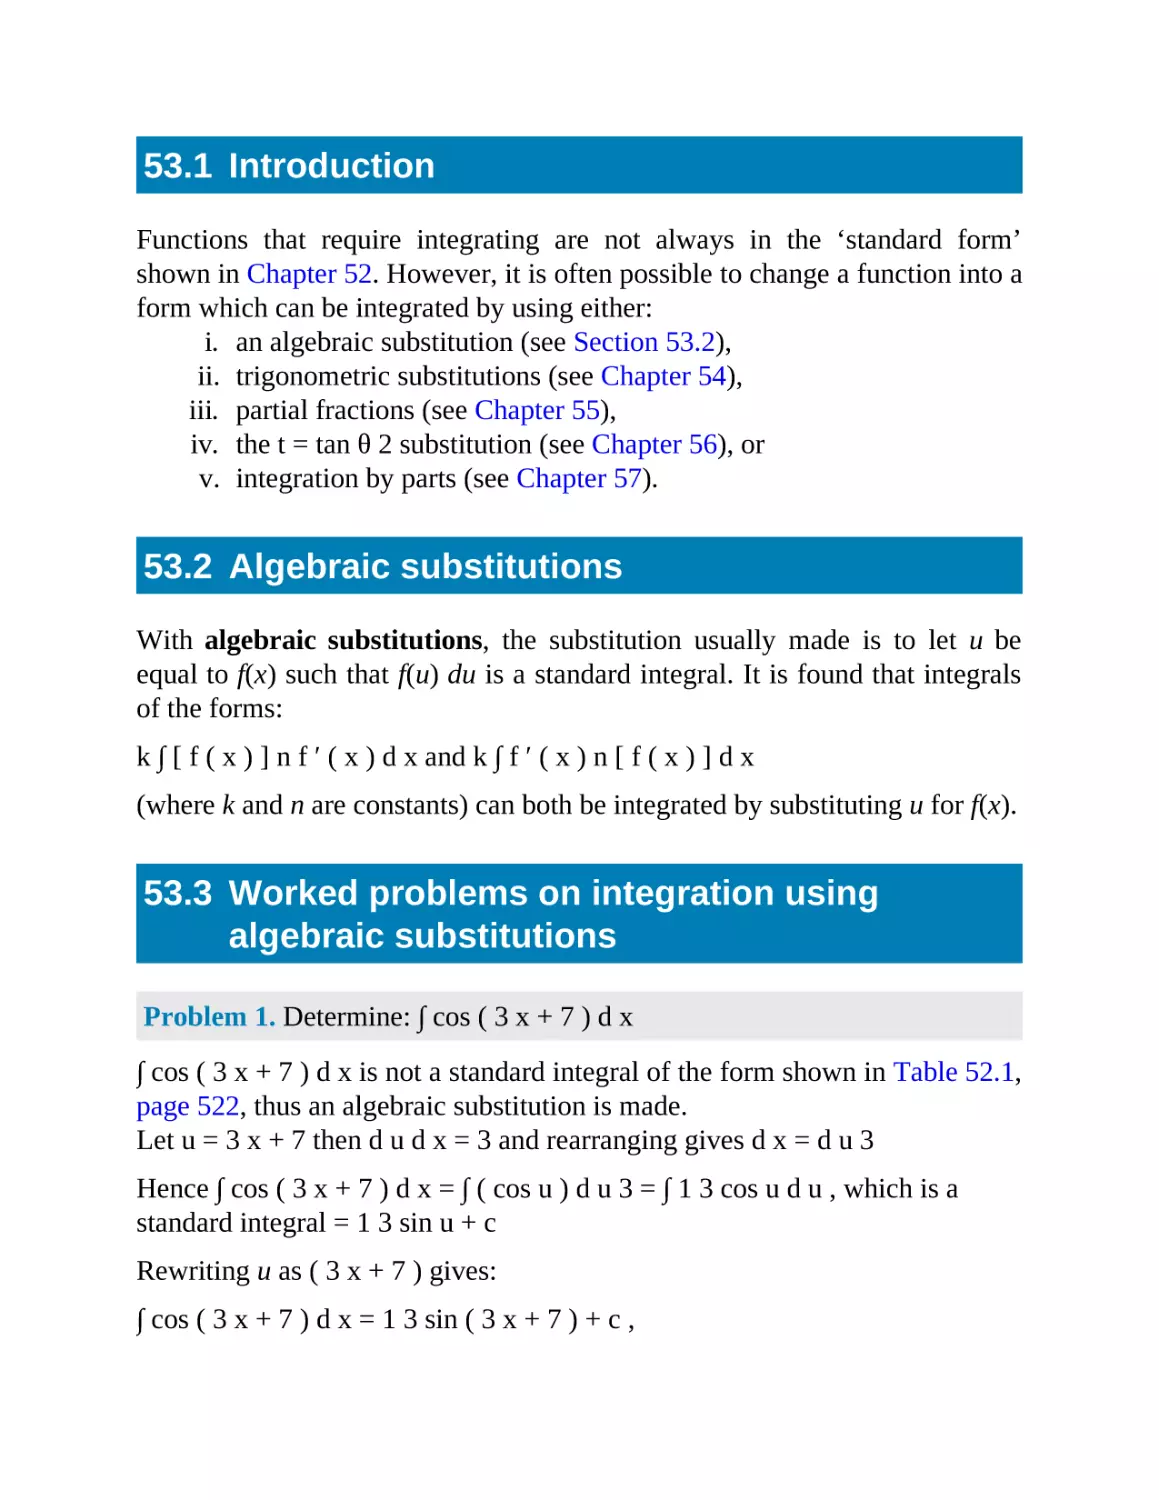 53.1 Introduction
53.2 Algebraic substitutions
53.3 Worked problems on integration using algebraic substitutions